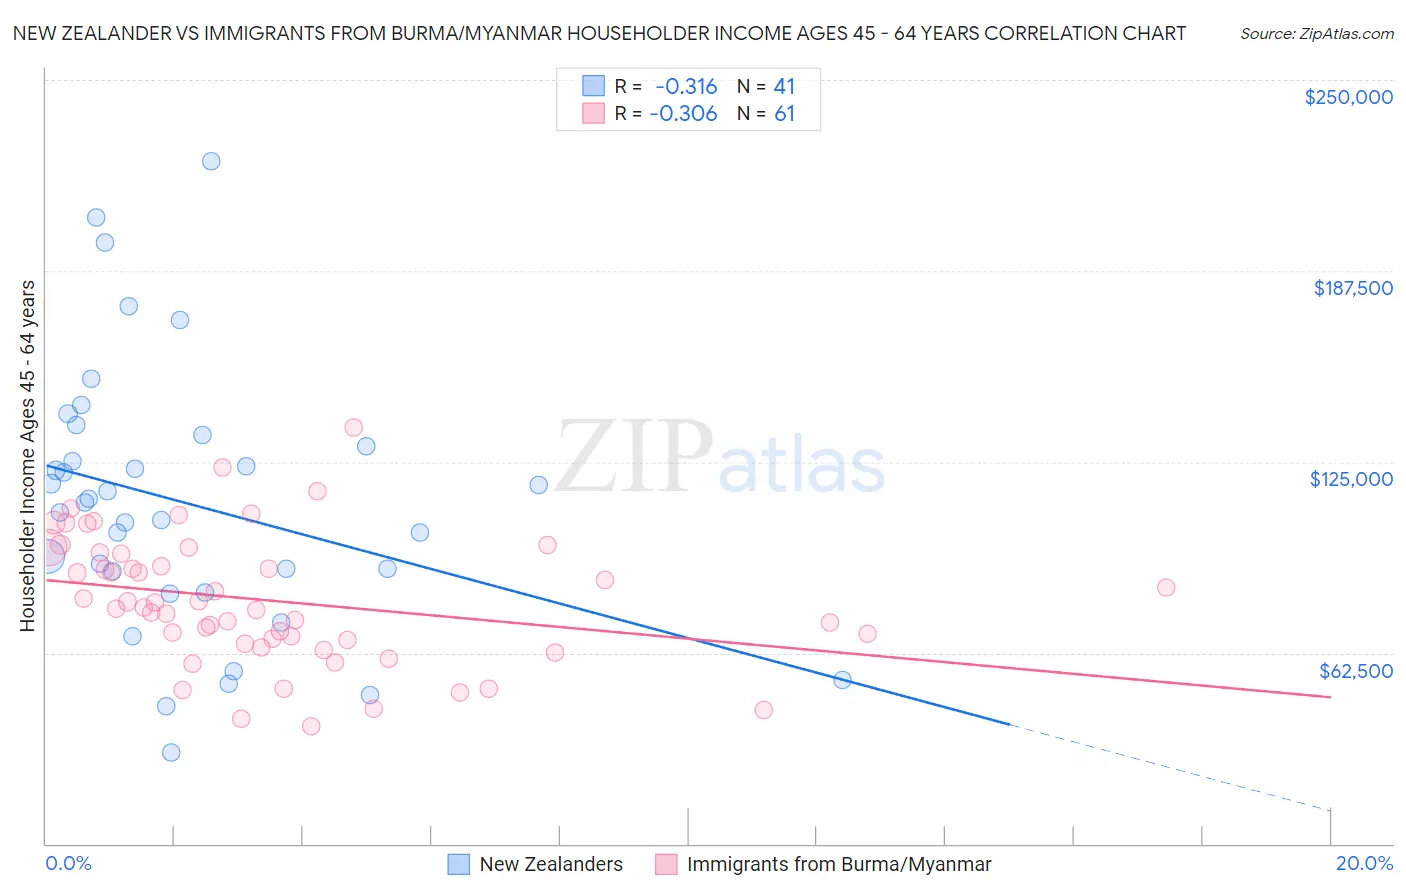 New Zealander vs Immigrants from Burma/Myanmar Householder Income Ages 45 - 64 years